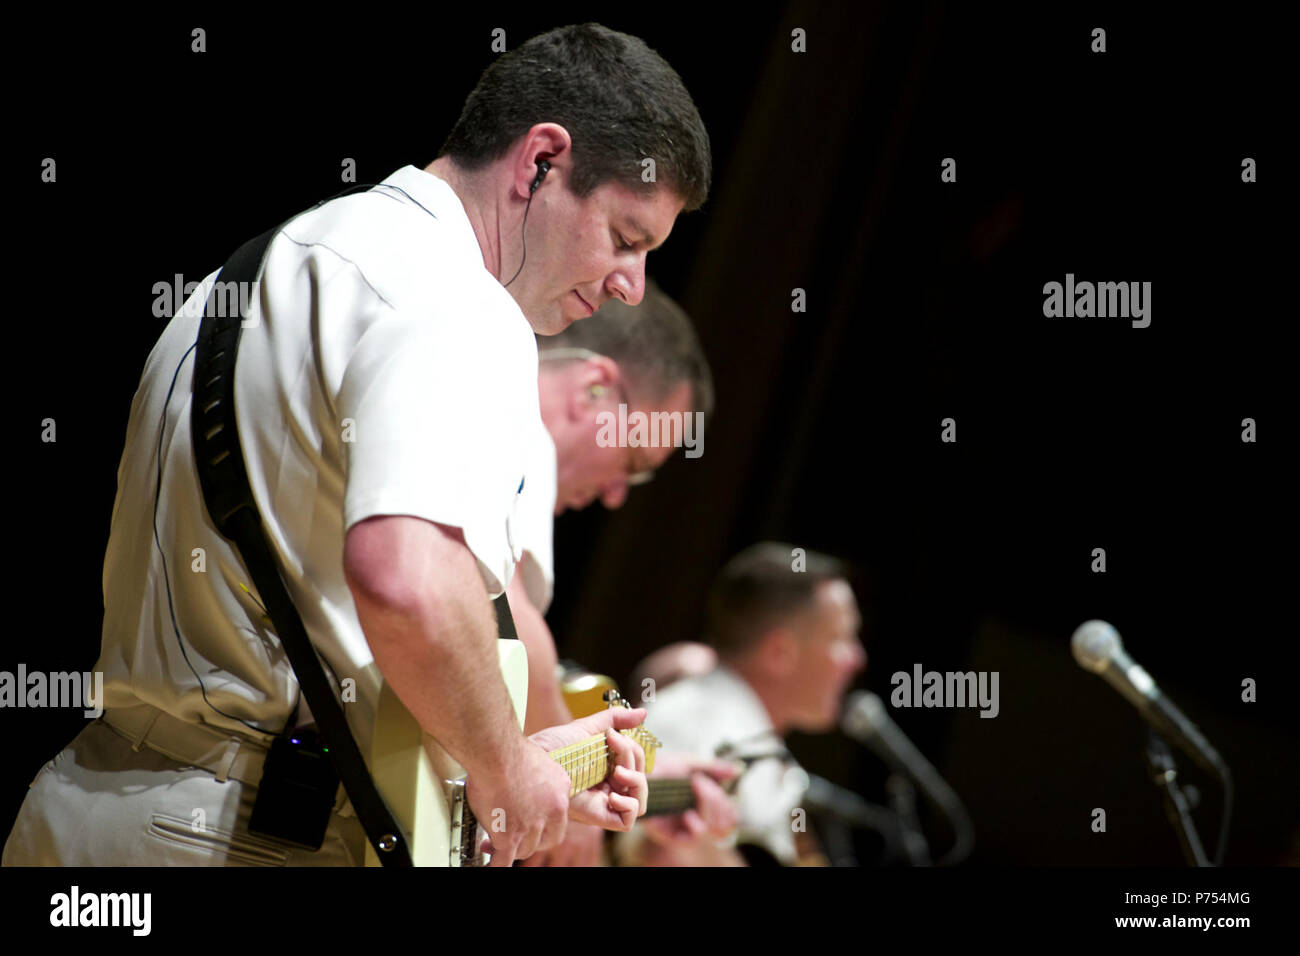 GLENDIVE, Mont. (Sept. 8, 2015) Musician 1st Class Joe Friedman performs with the U.S. Navy Band Country Current at the Dawson County High School Auditorium in Glendive, Mont. The Navy Band's tour featured 14 performances in six states, reaching out to communities that don't normally see the Navy at work. Stock Photo